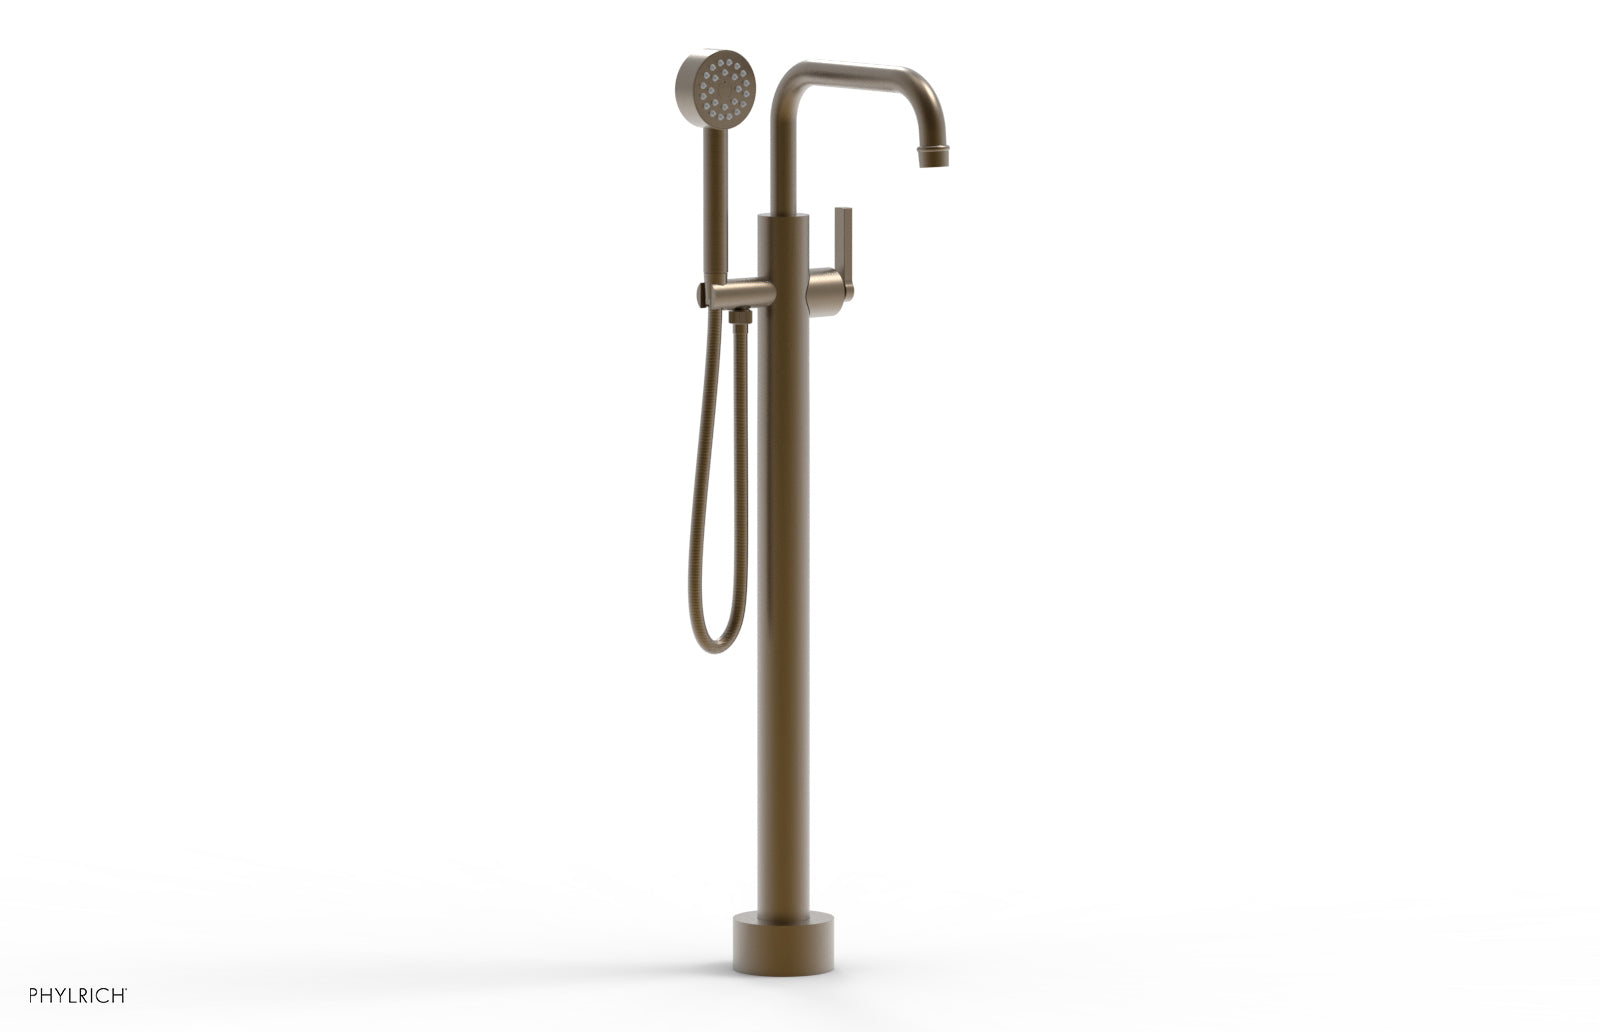 Phylrich HEX MODERN Tall Floor Mount Tub Filler - Lever Handle with Hand Shower